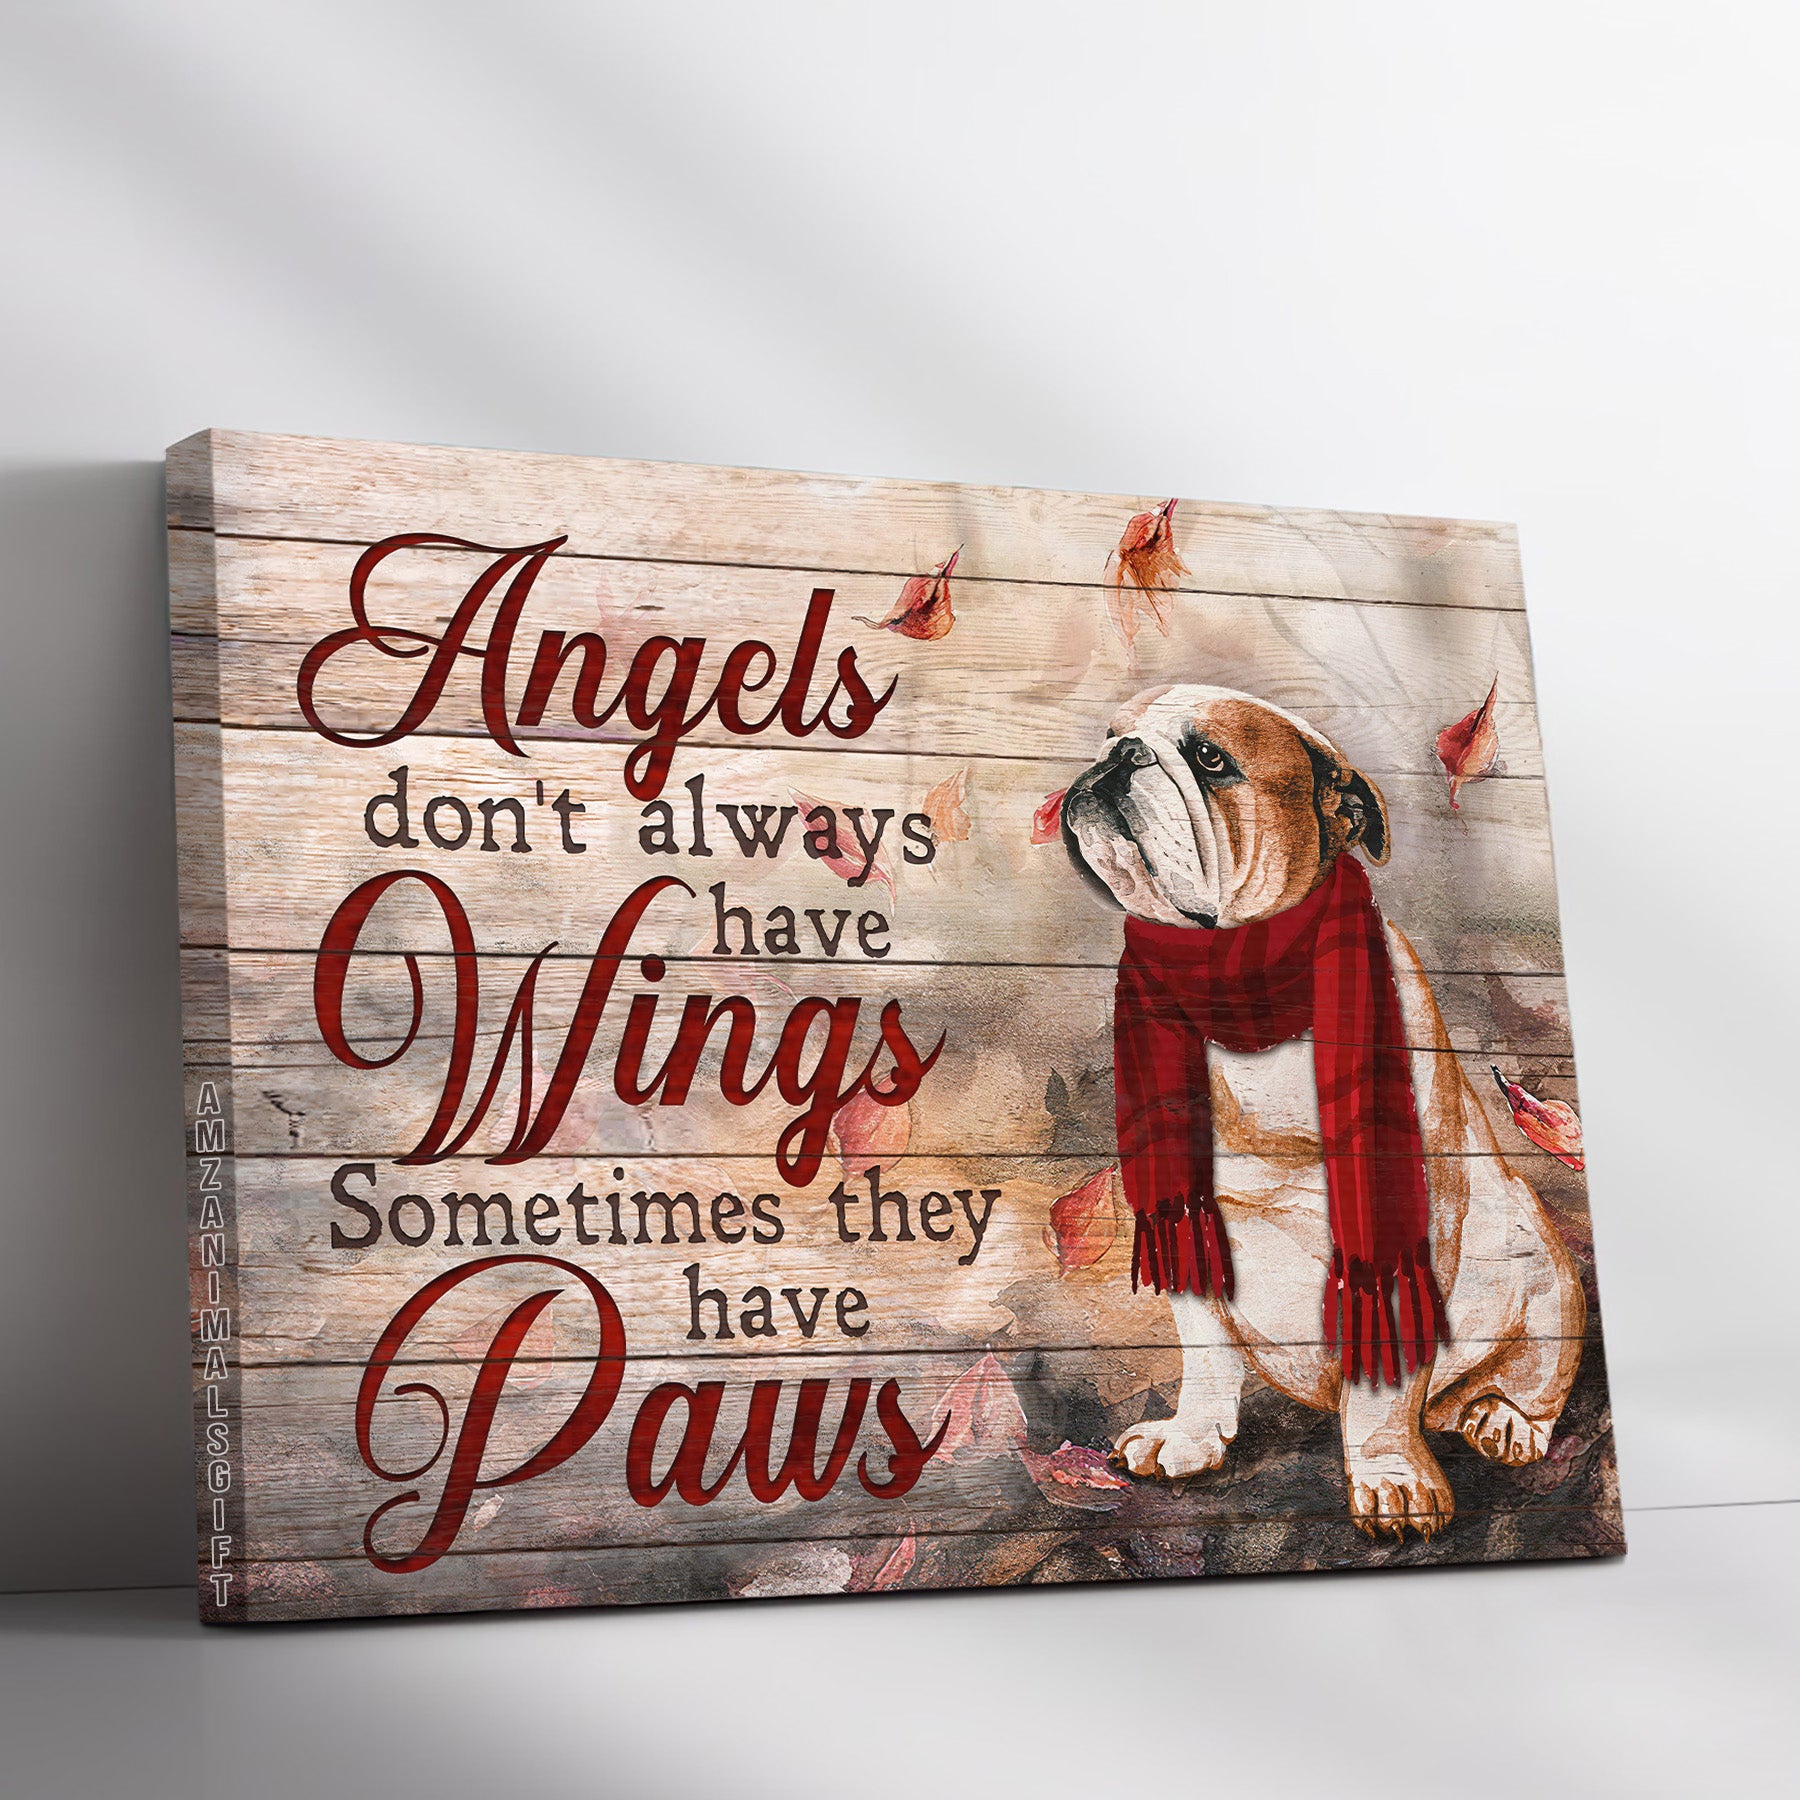 English Bulldog Premium Wrapped Landscape Canvas - English Bulldog, Autumn Leaf, Angels Don't Always Have Wings - Gift For English Bulldog Lovers